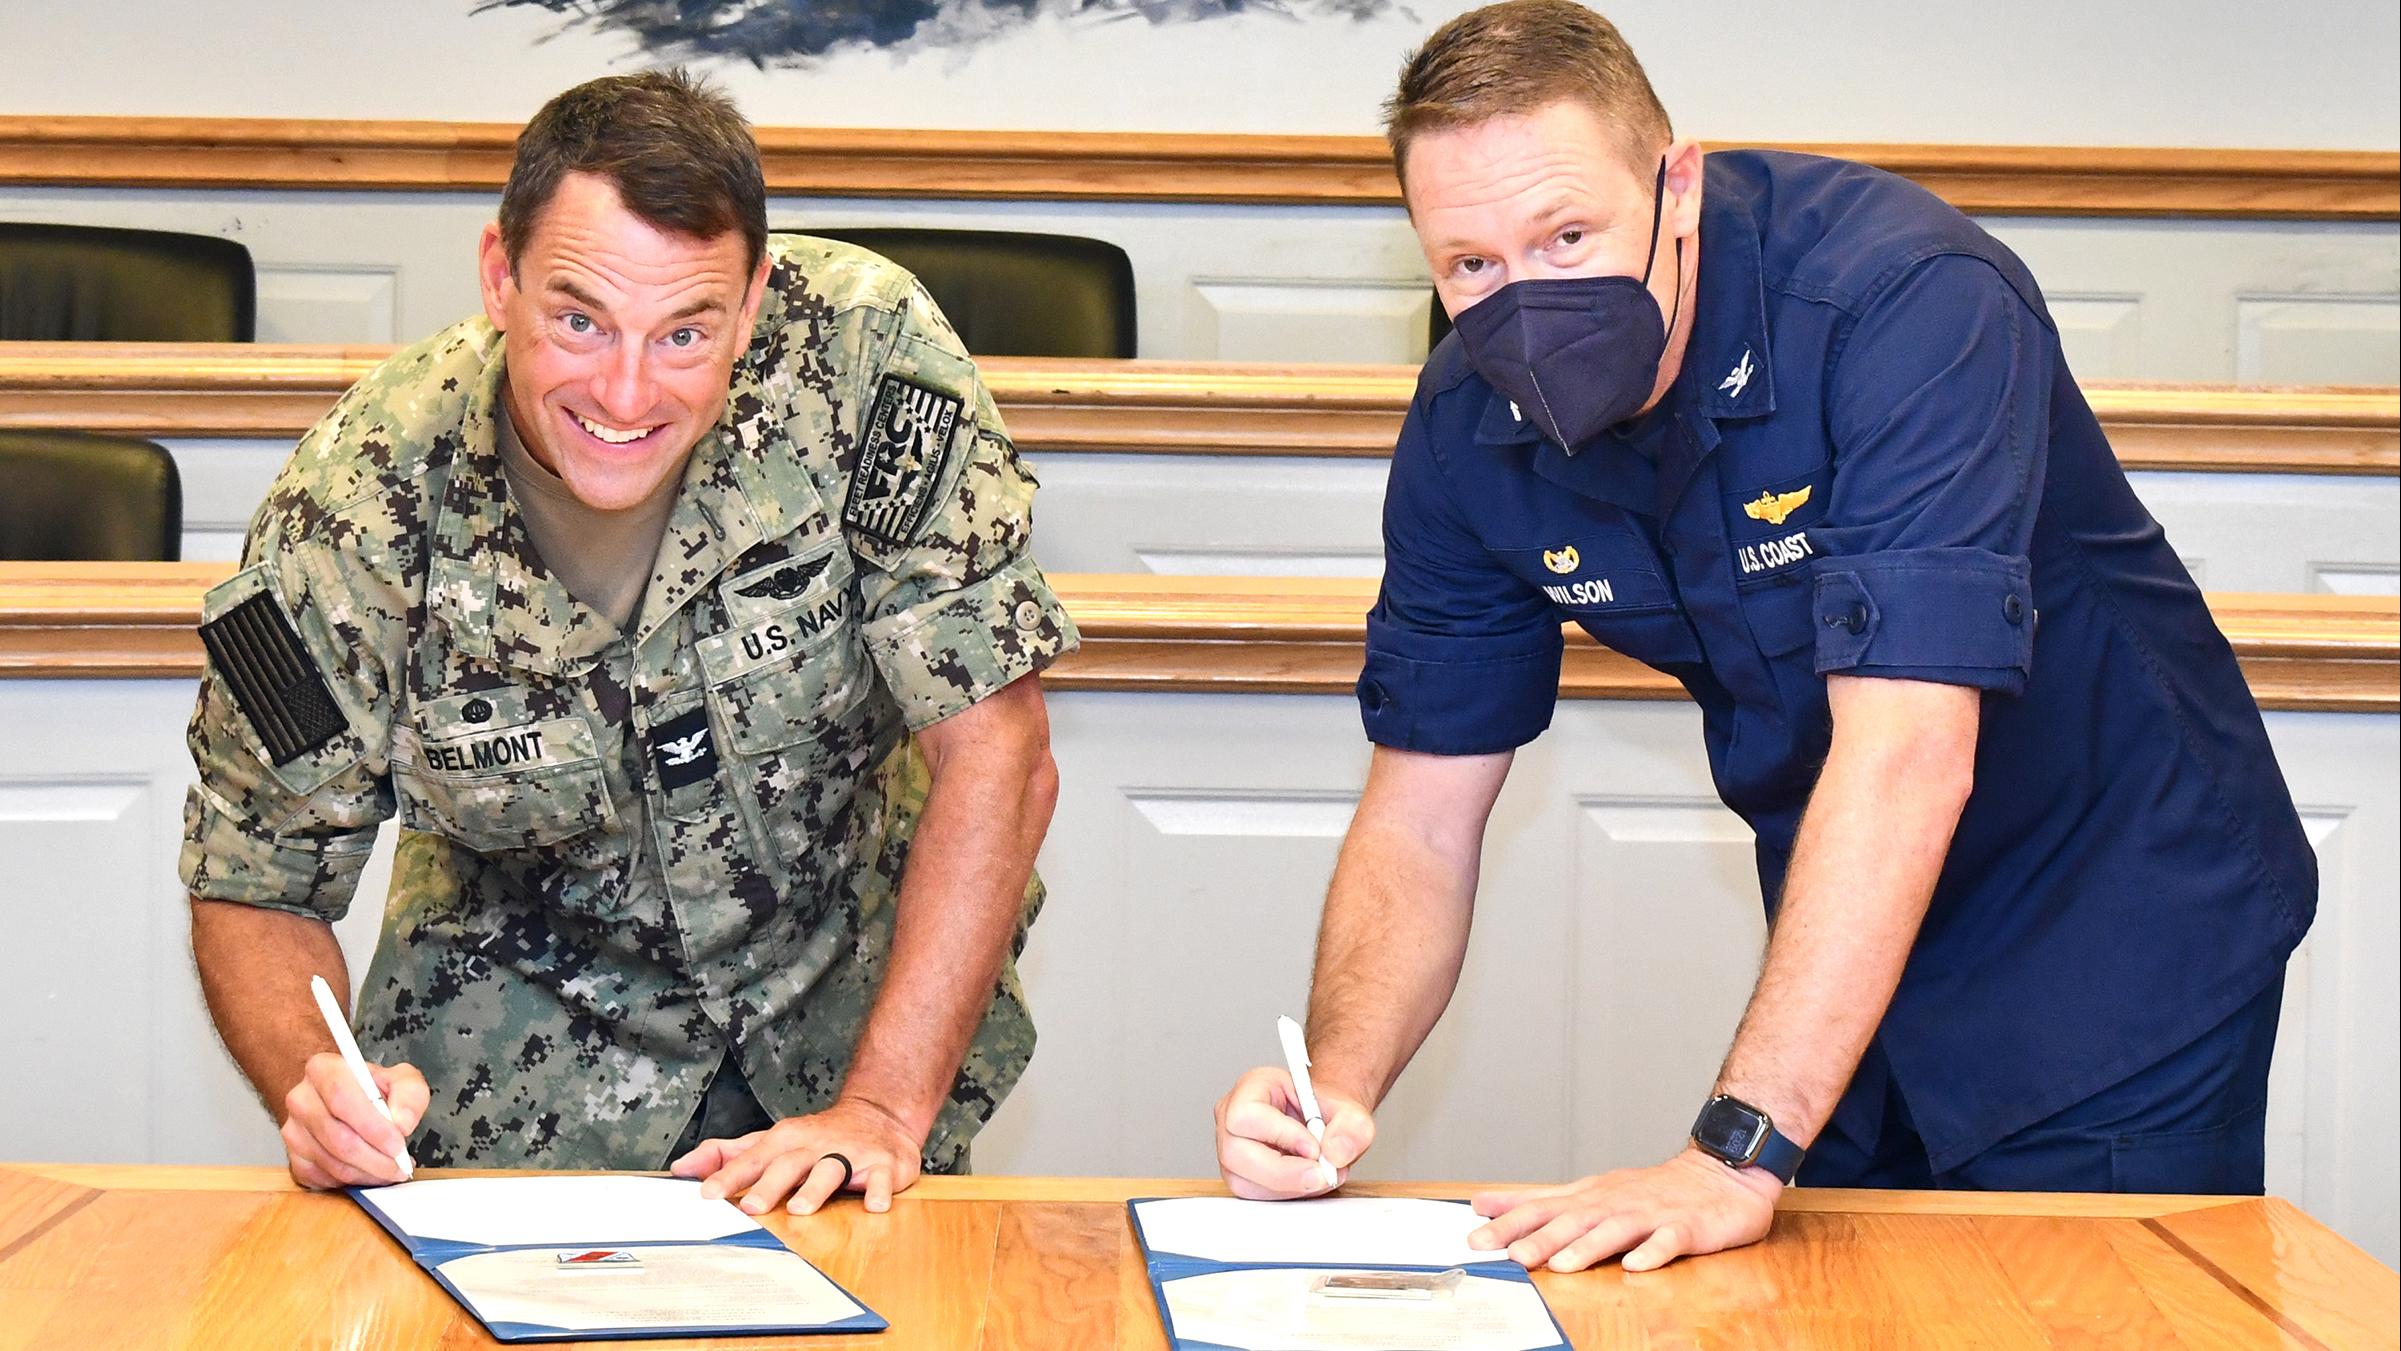 Two commanders look at camera while signing documents